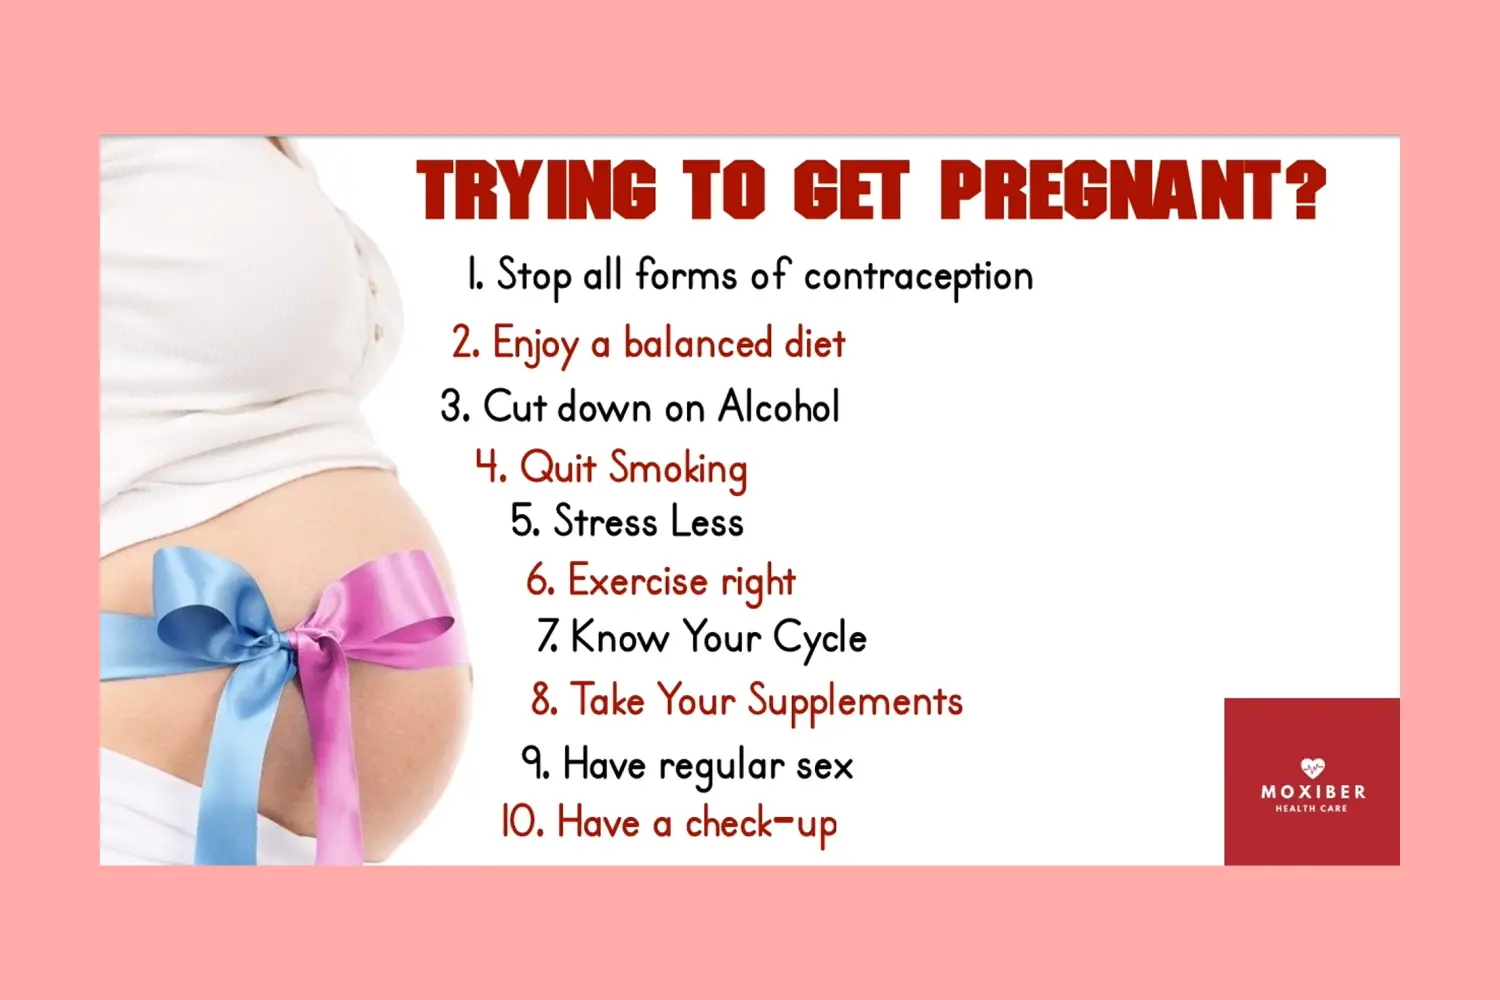 How to get pregnant fast and easy: I need to get pregnant ...